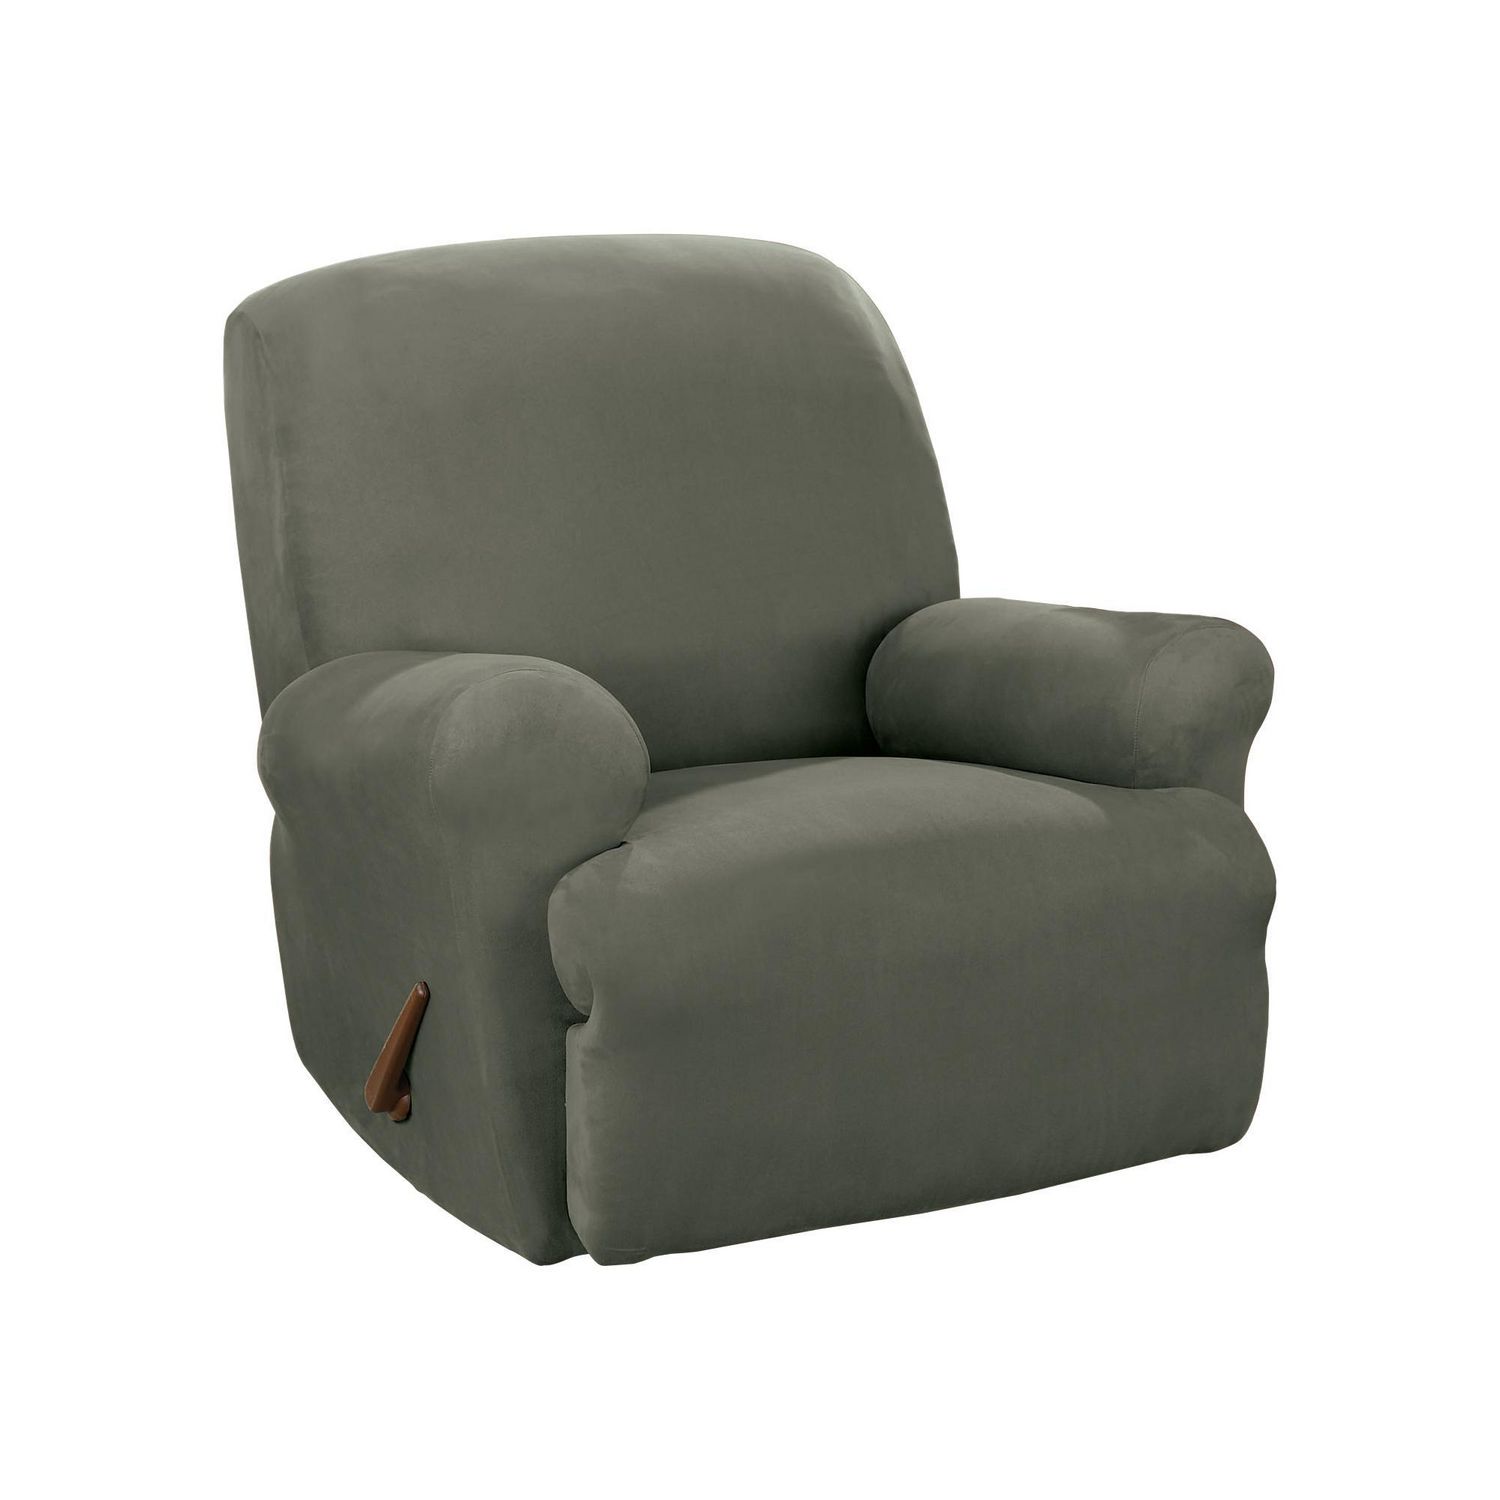 Sure Fit Stretch Suede Recliner Slipcover Walmart Canada